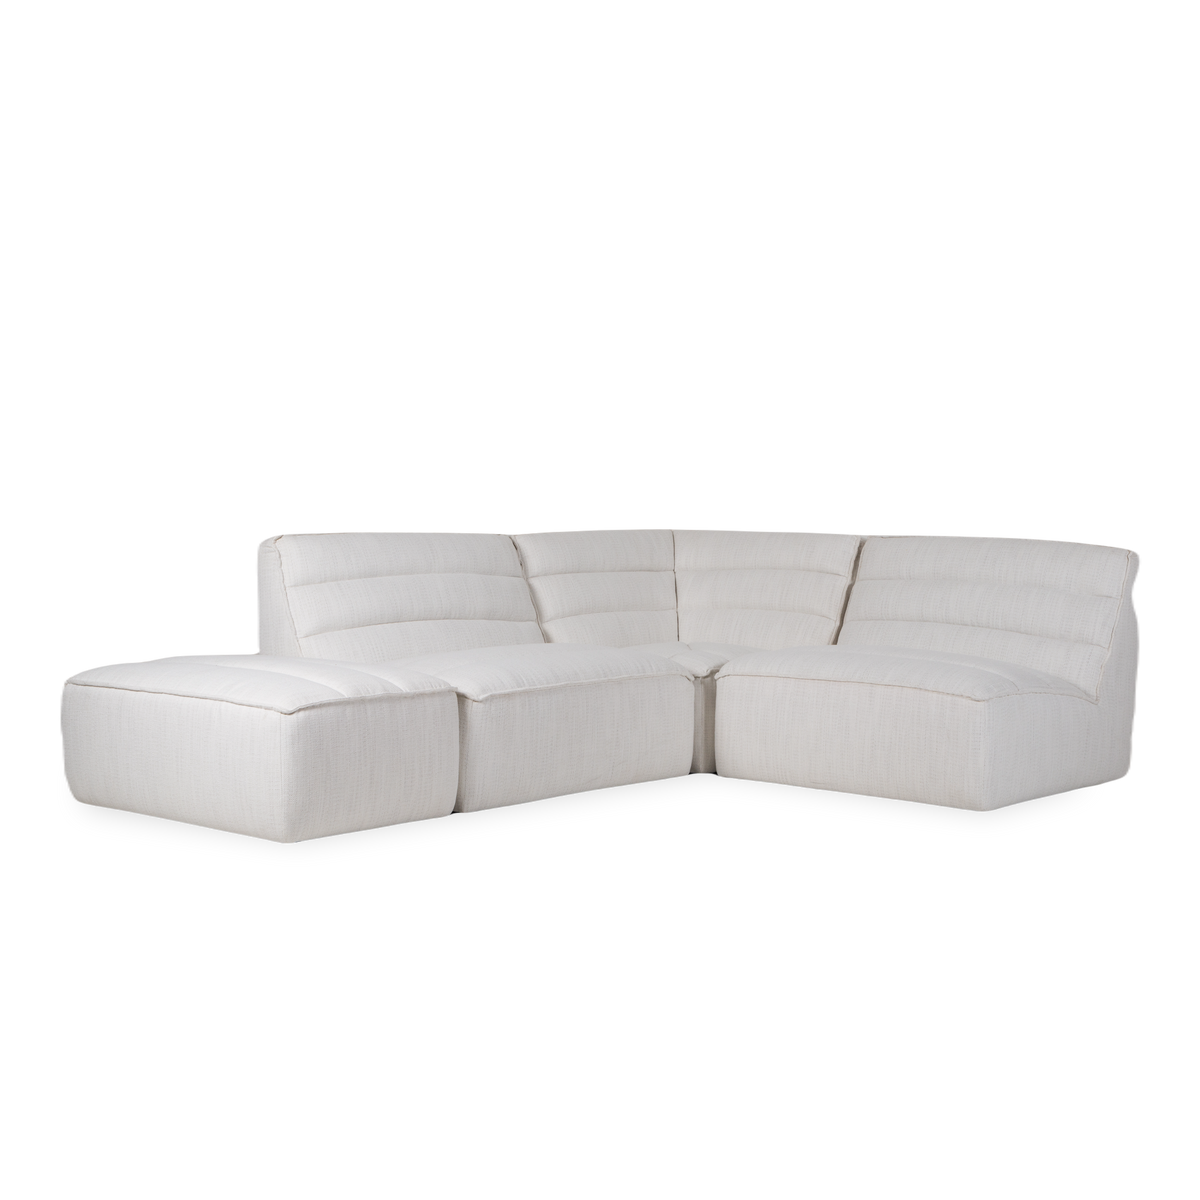 Inspired by 70s modernist interiors, the Nomad Modular Sectional offers a relaxed and casual style.